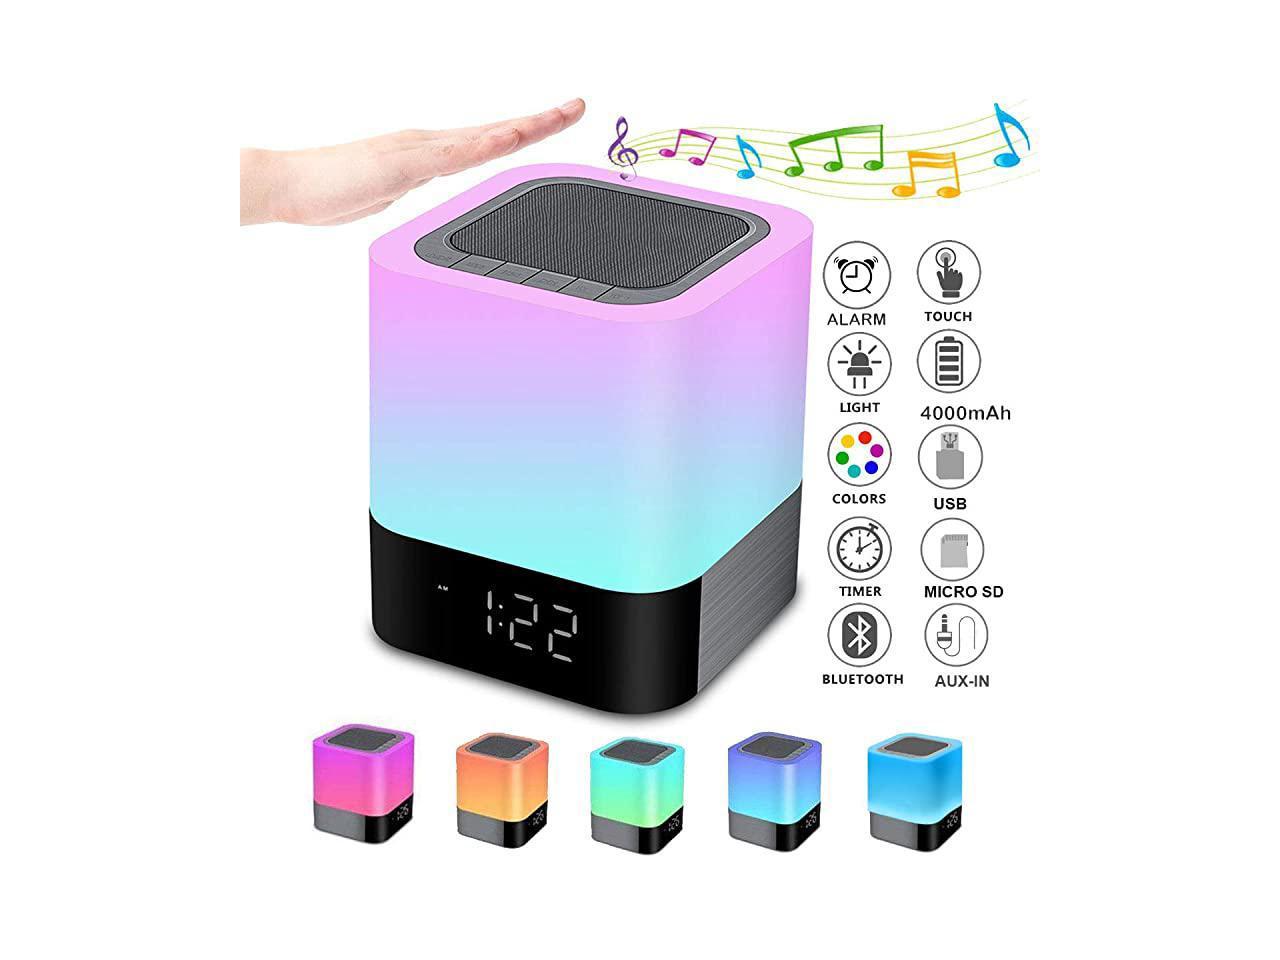 Bluetooth Speaker Bedside Lamp LED Touch RGB Night Light Alarm Clock Xmas Gifts 